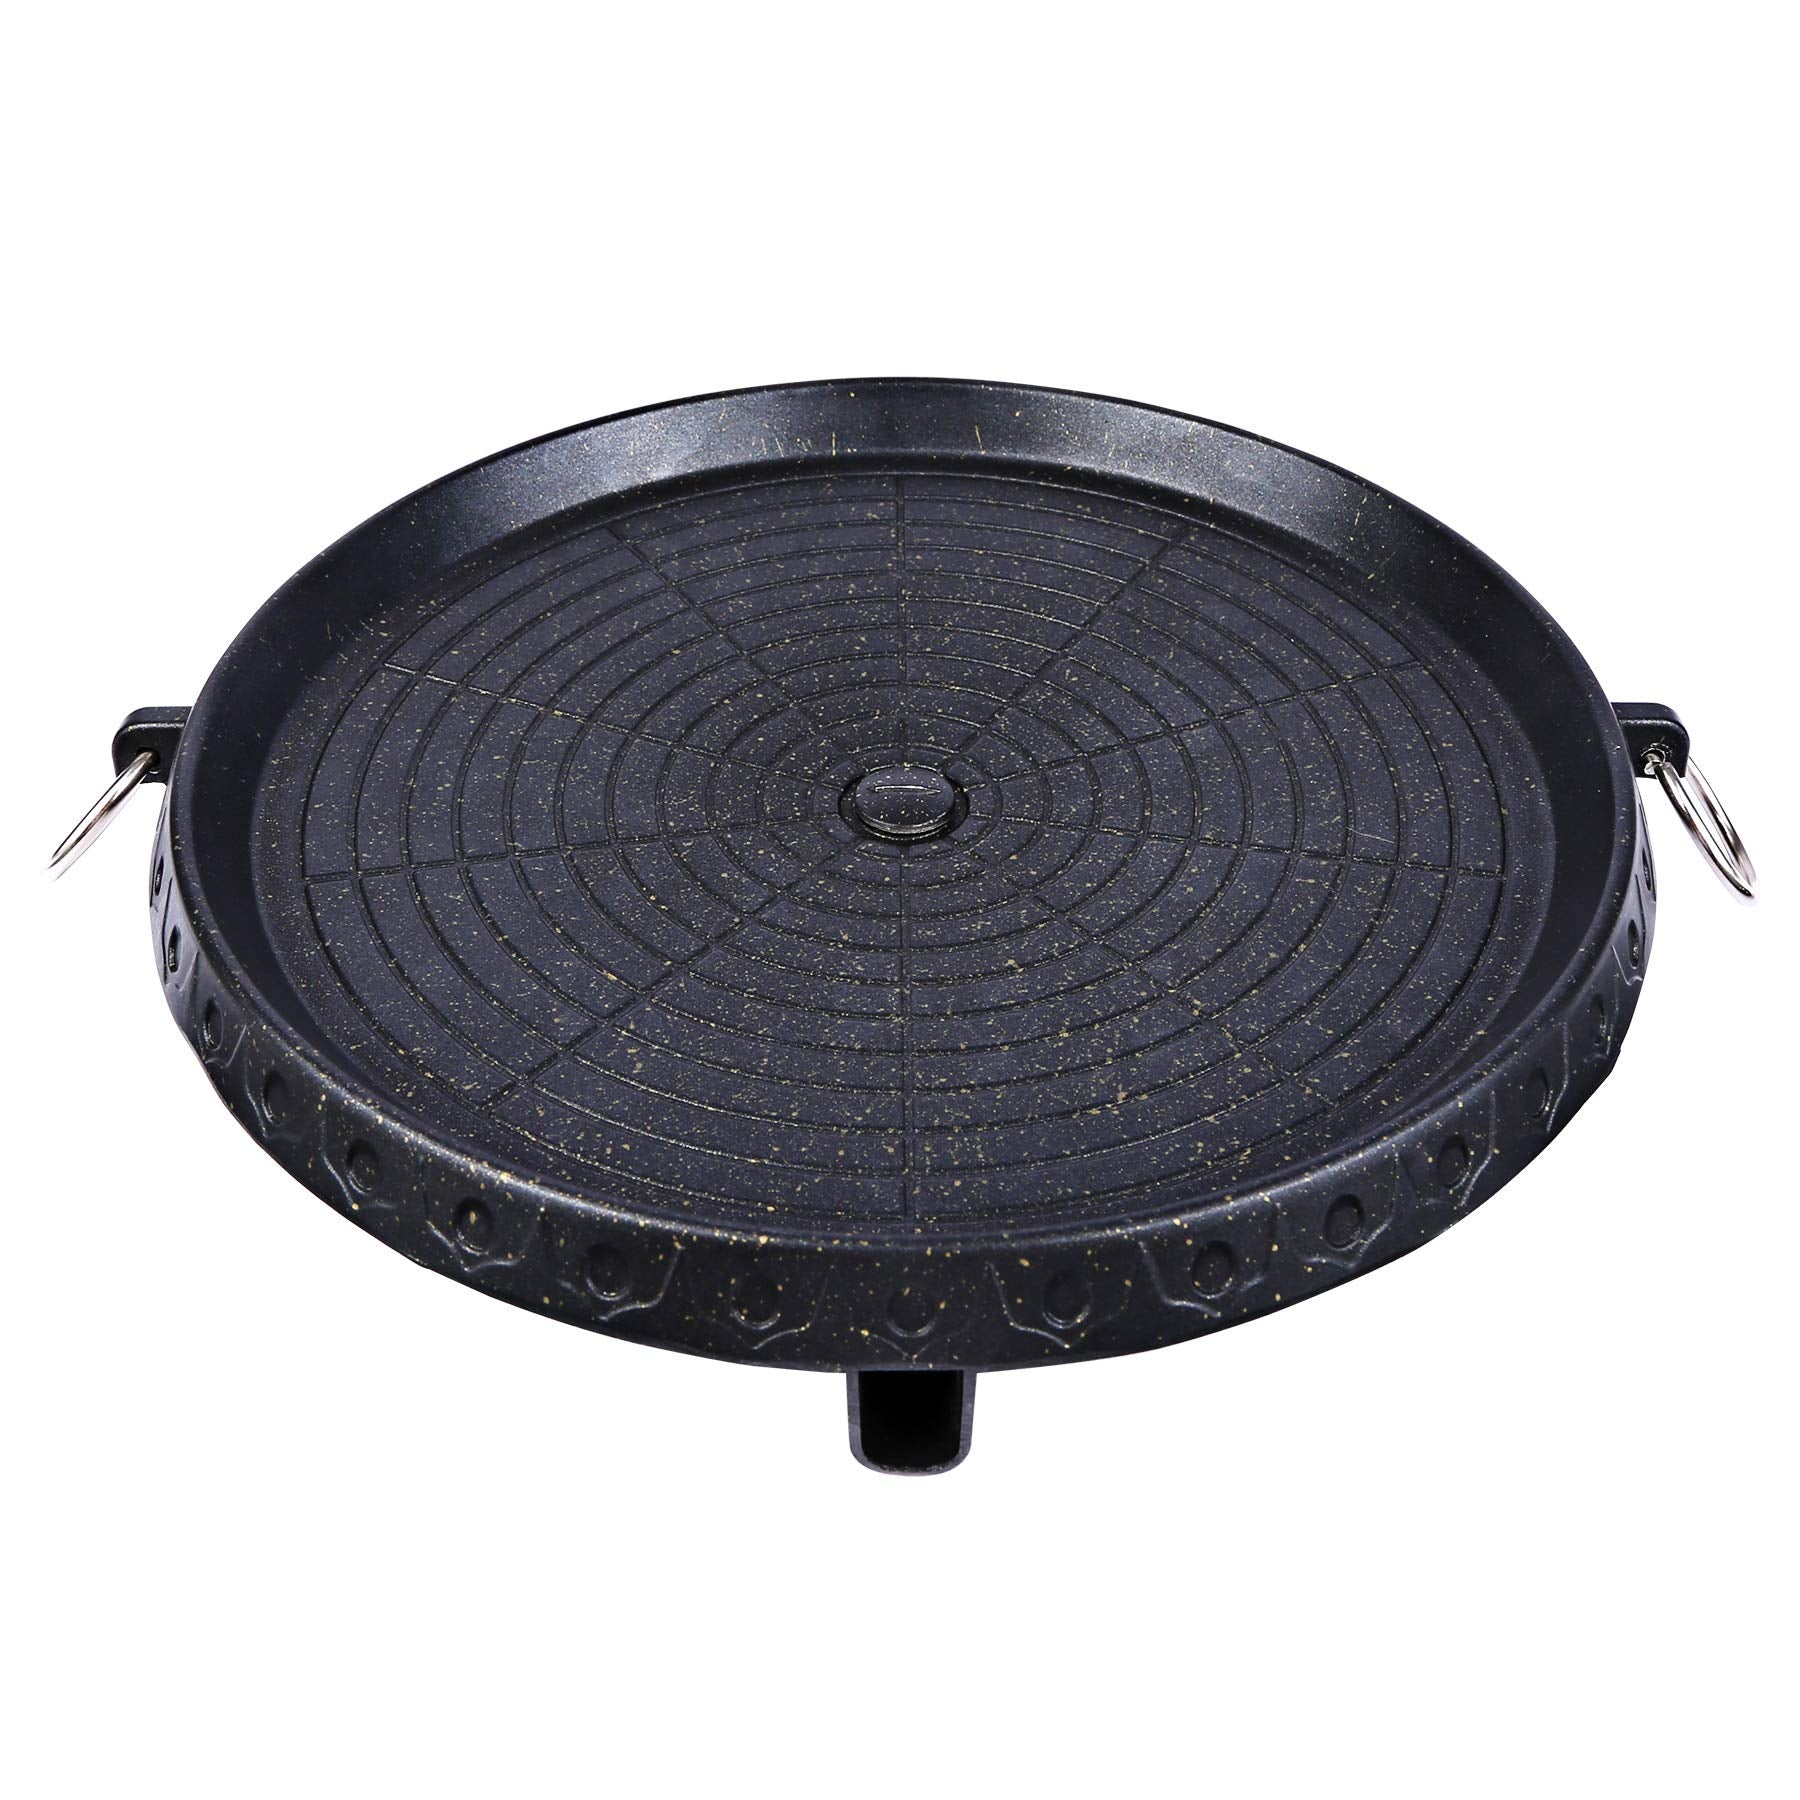 Korean BBQ Grill Pan Non-Stick Smokeless Stovetop BBQ Grill Plate | Indoor Outdoor